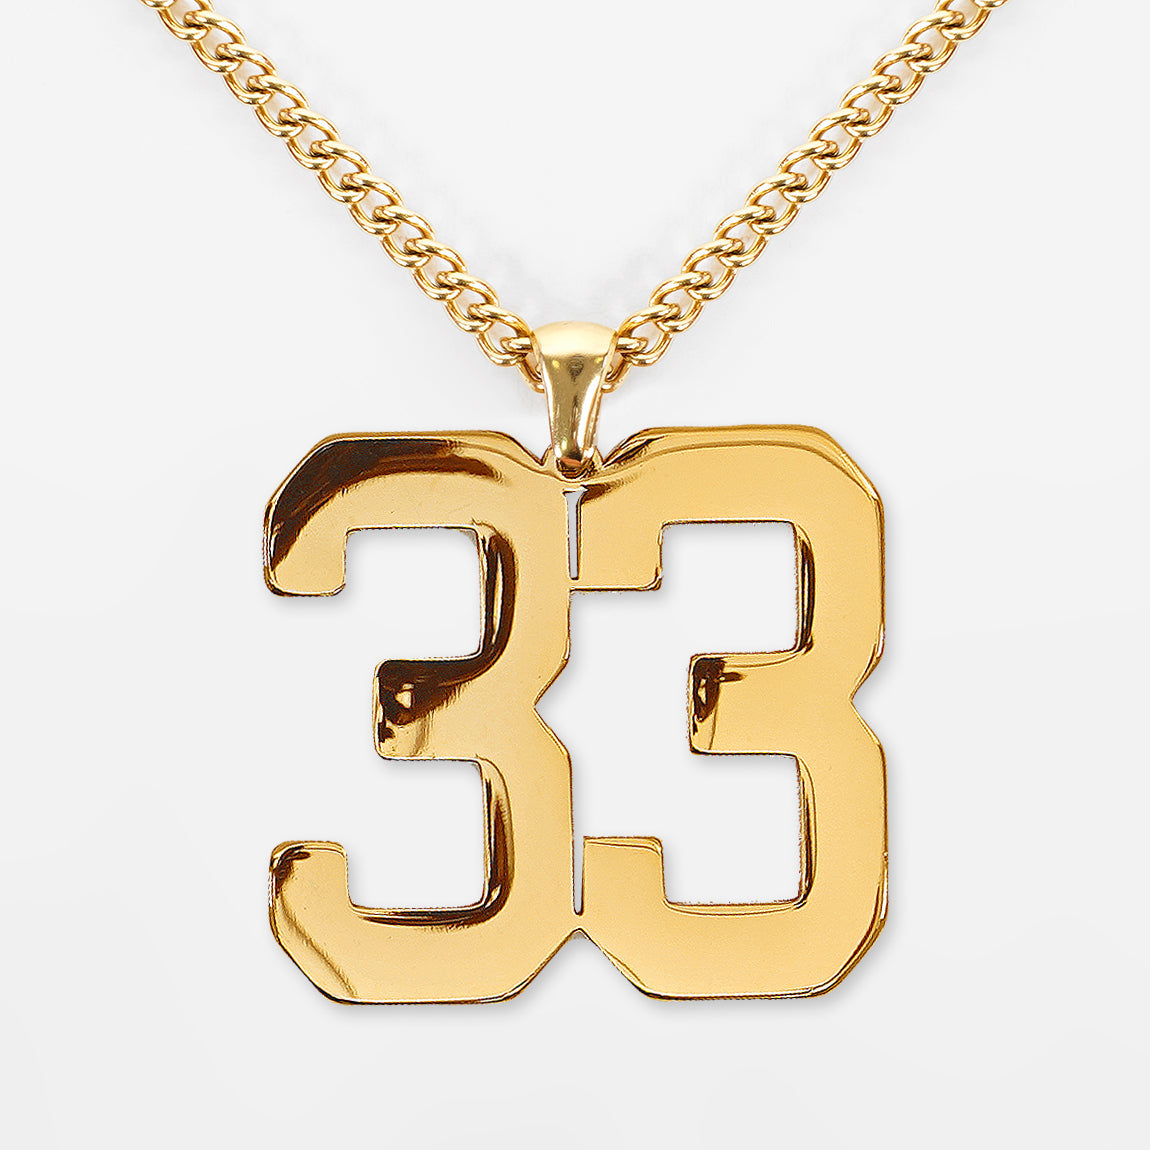 33 Number Pendant with Chain Kids Necklace - Gold Plated Stainless Steel